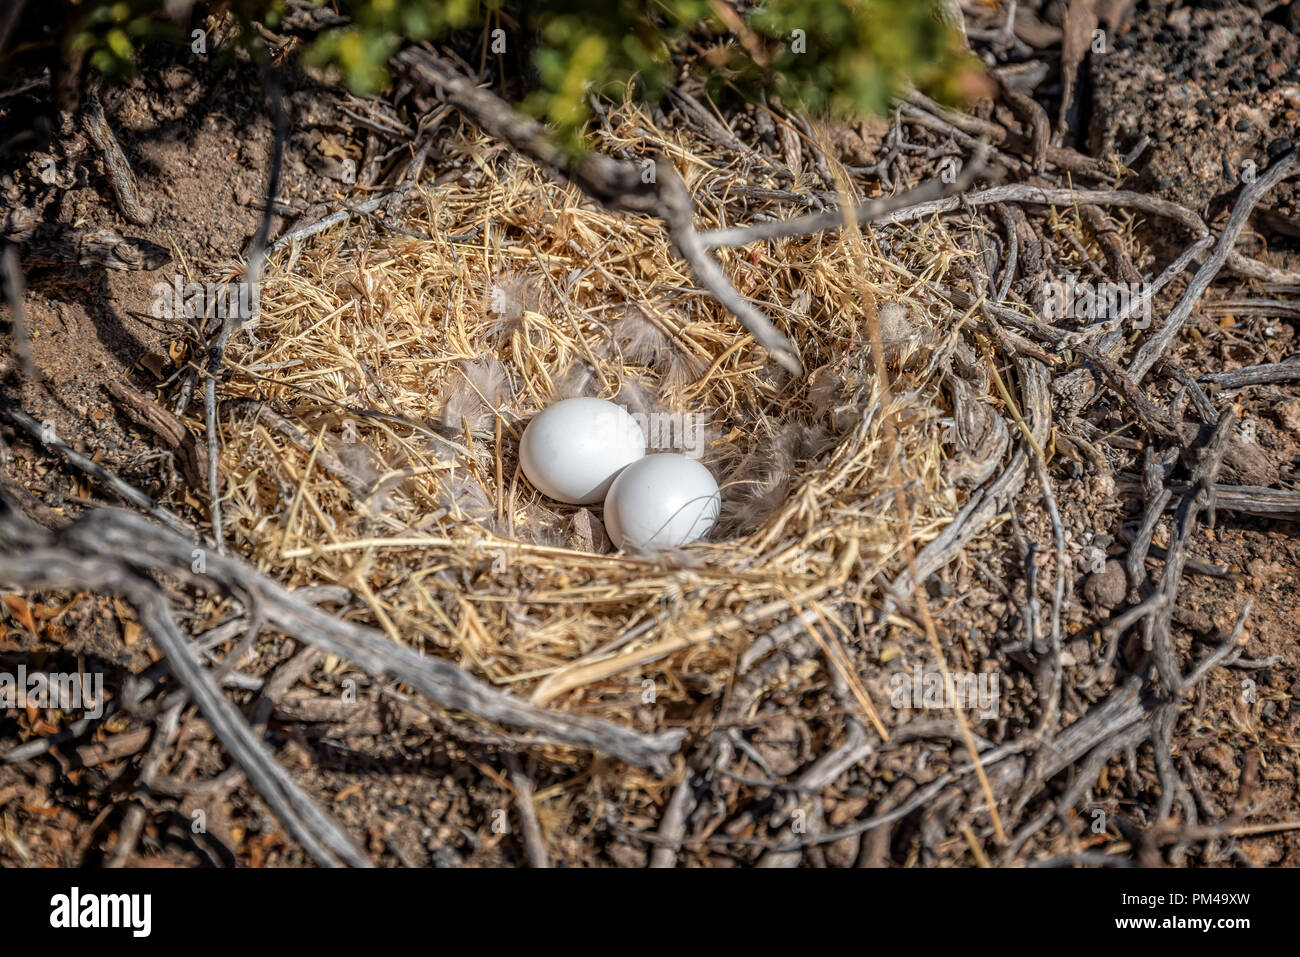 White eggs in a bird nest on the ground Stock Photo